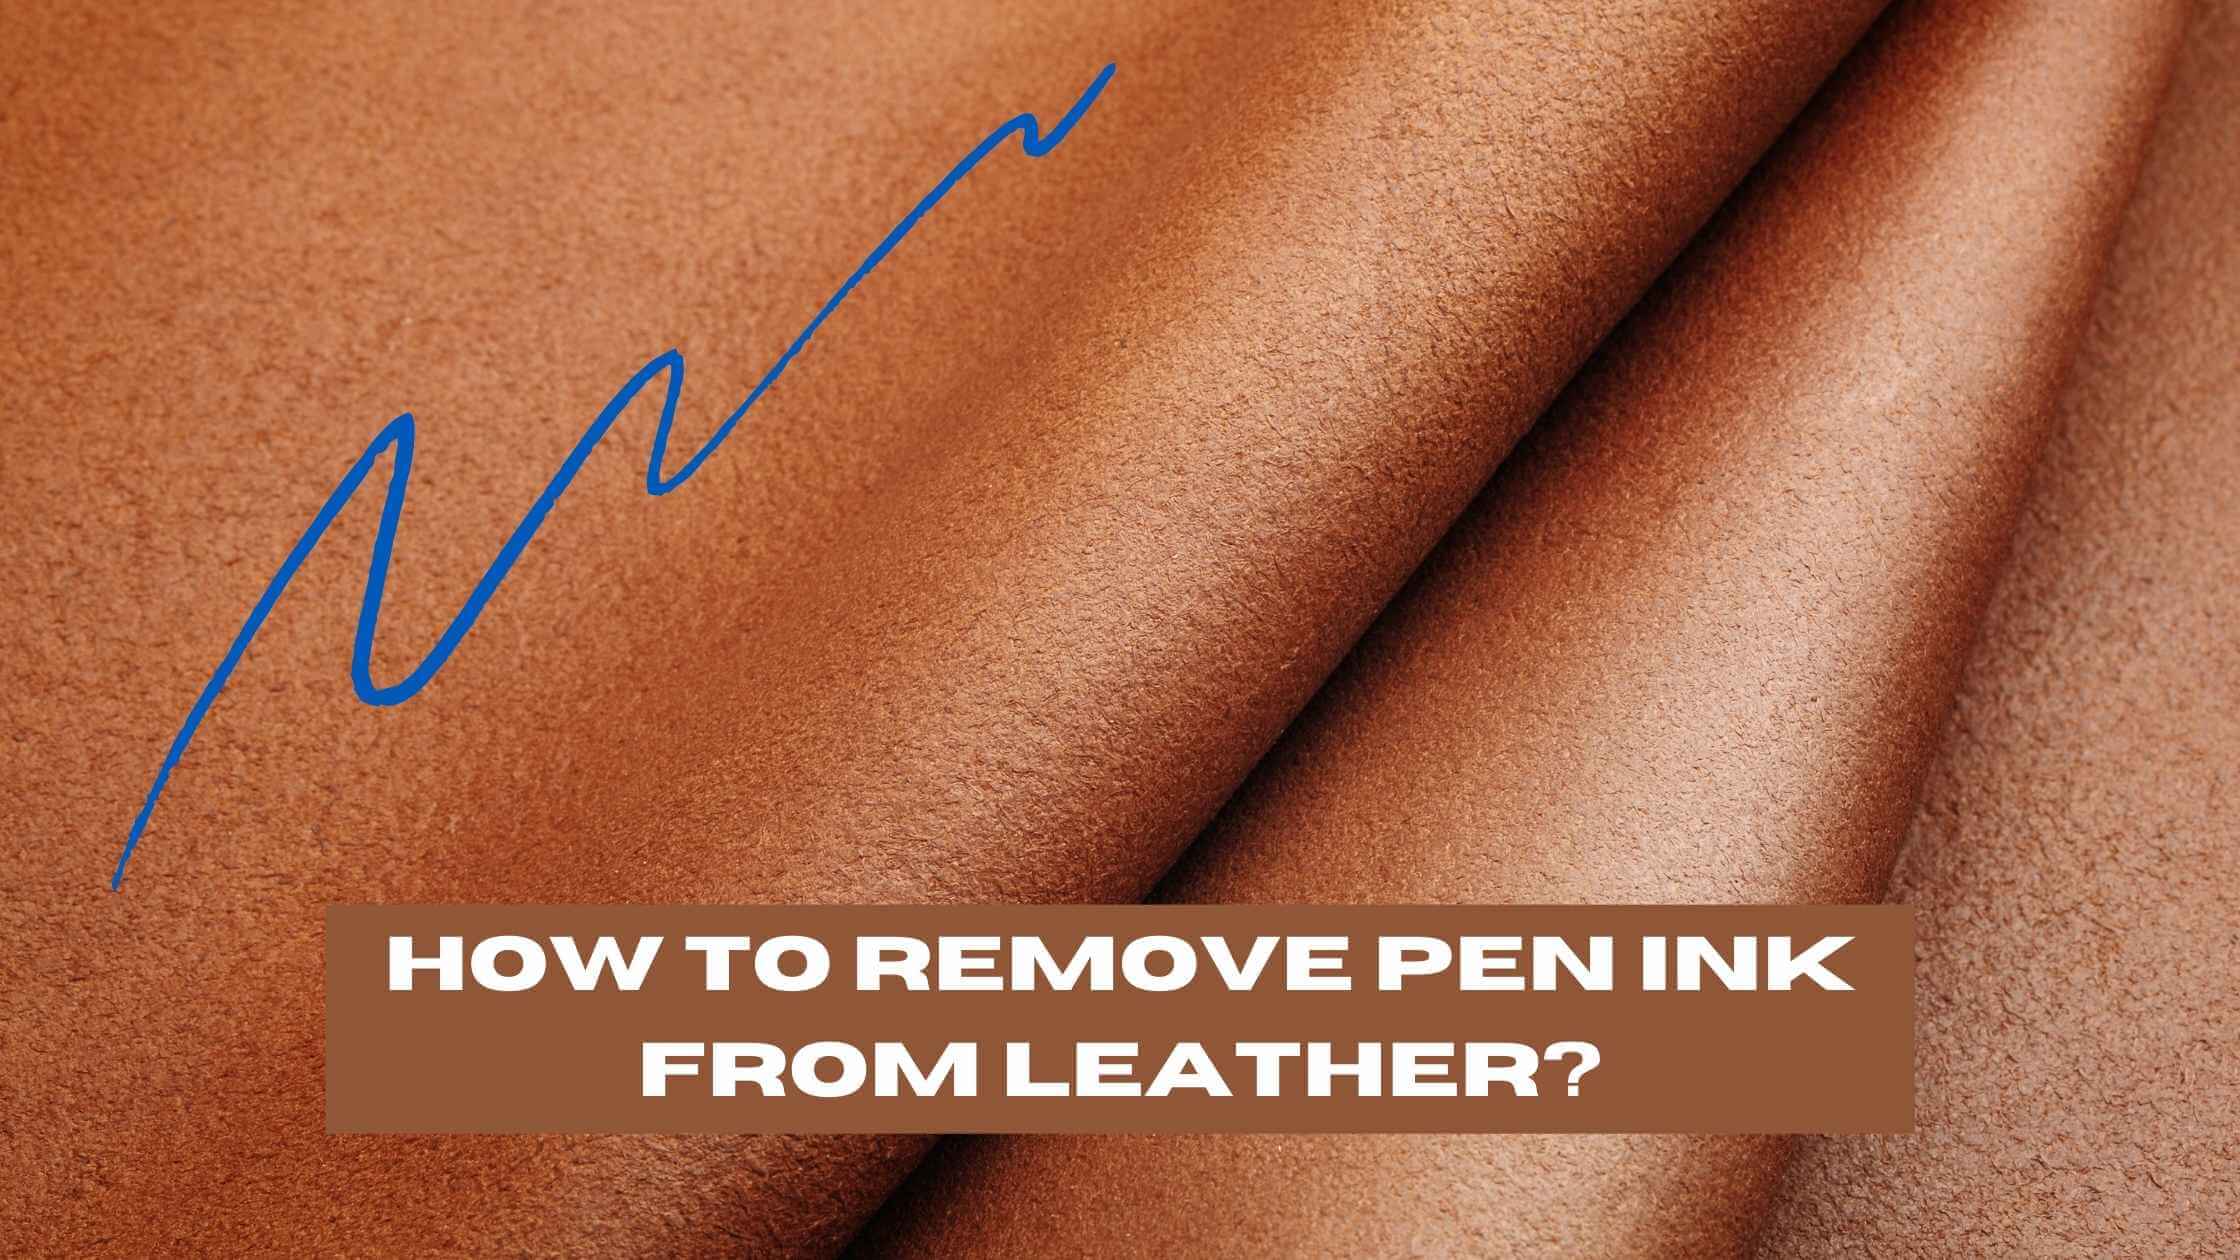 How to Remove Pen Ink from Leather